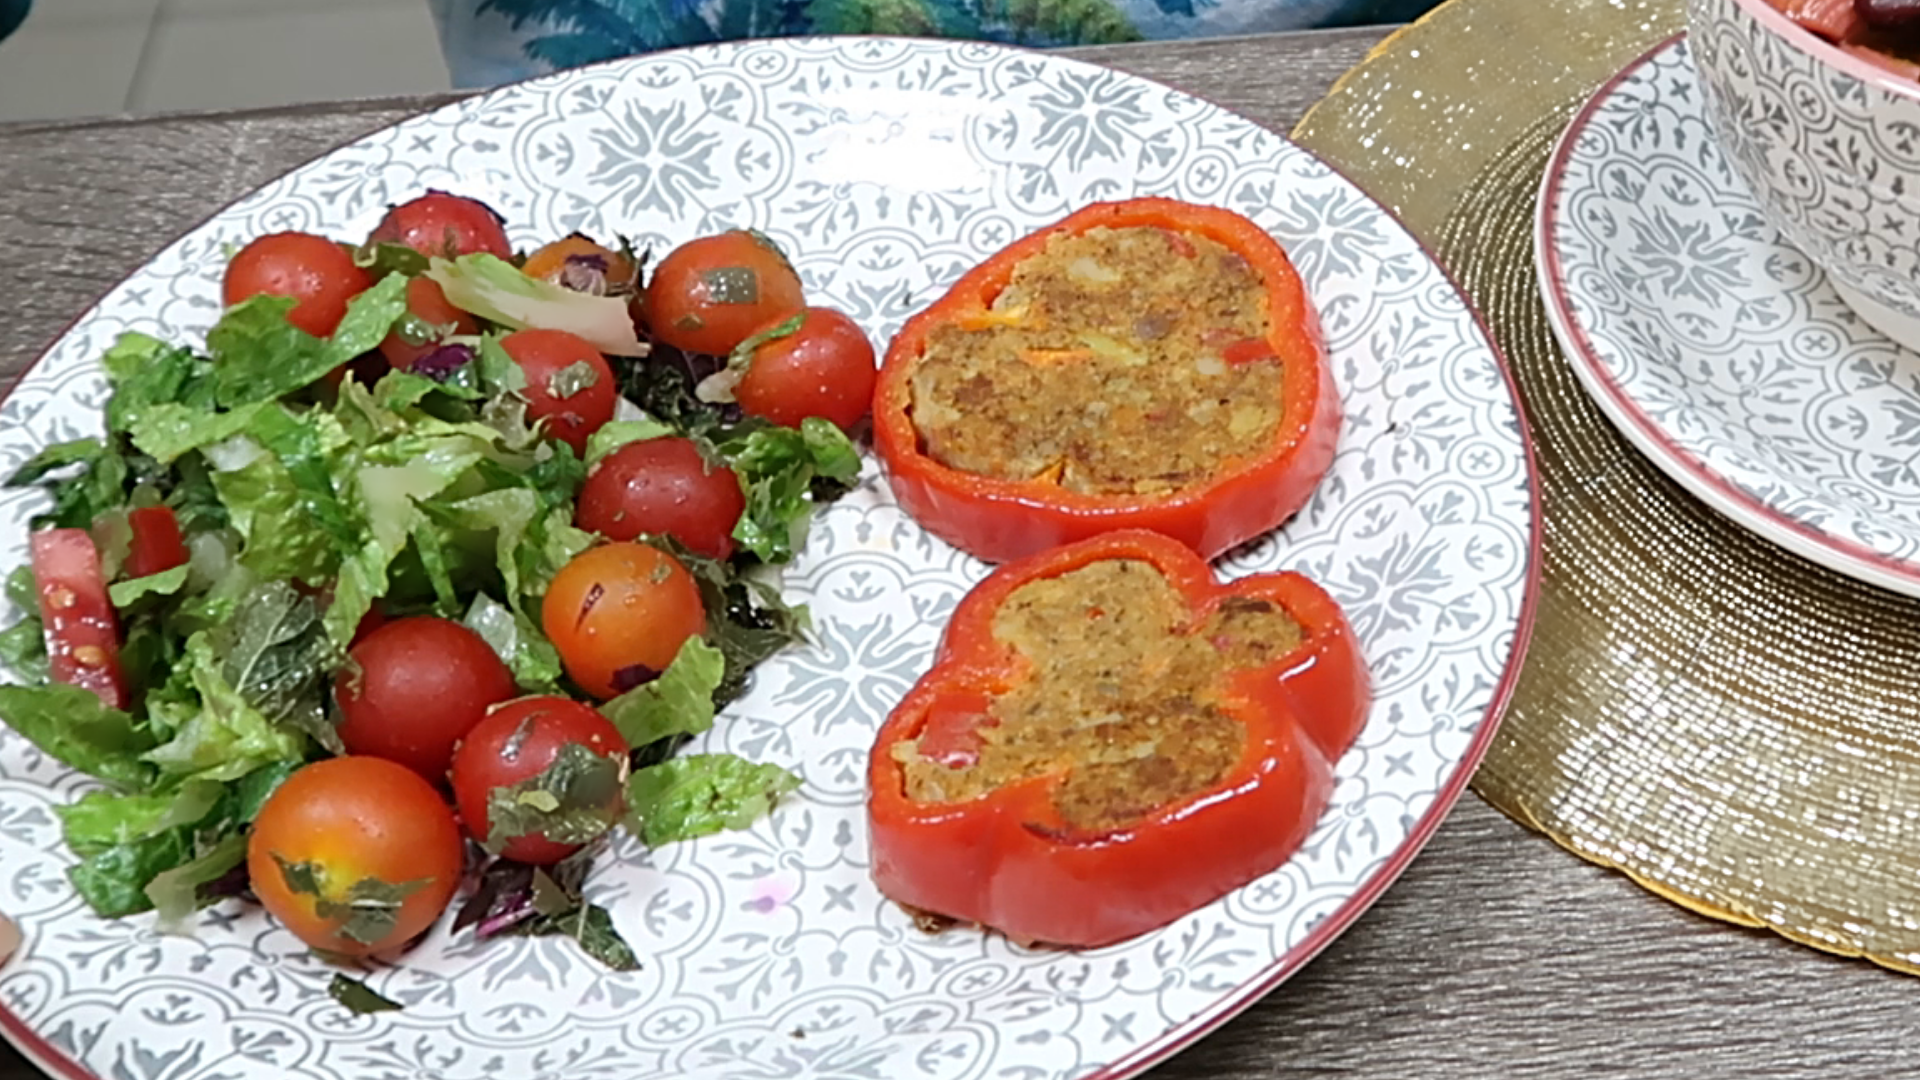 Potato Cutlets in Bell Peppers